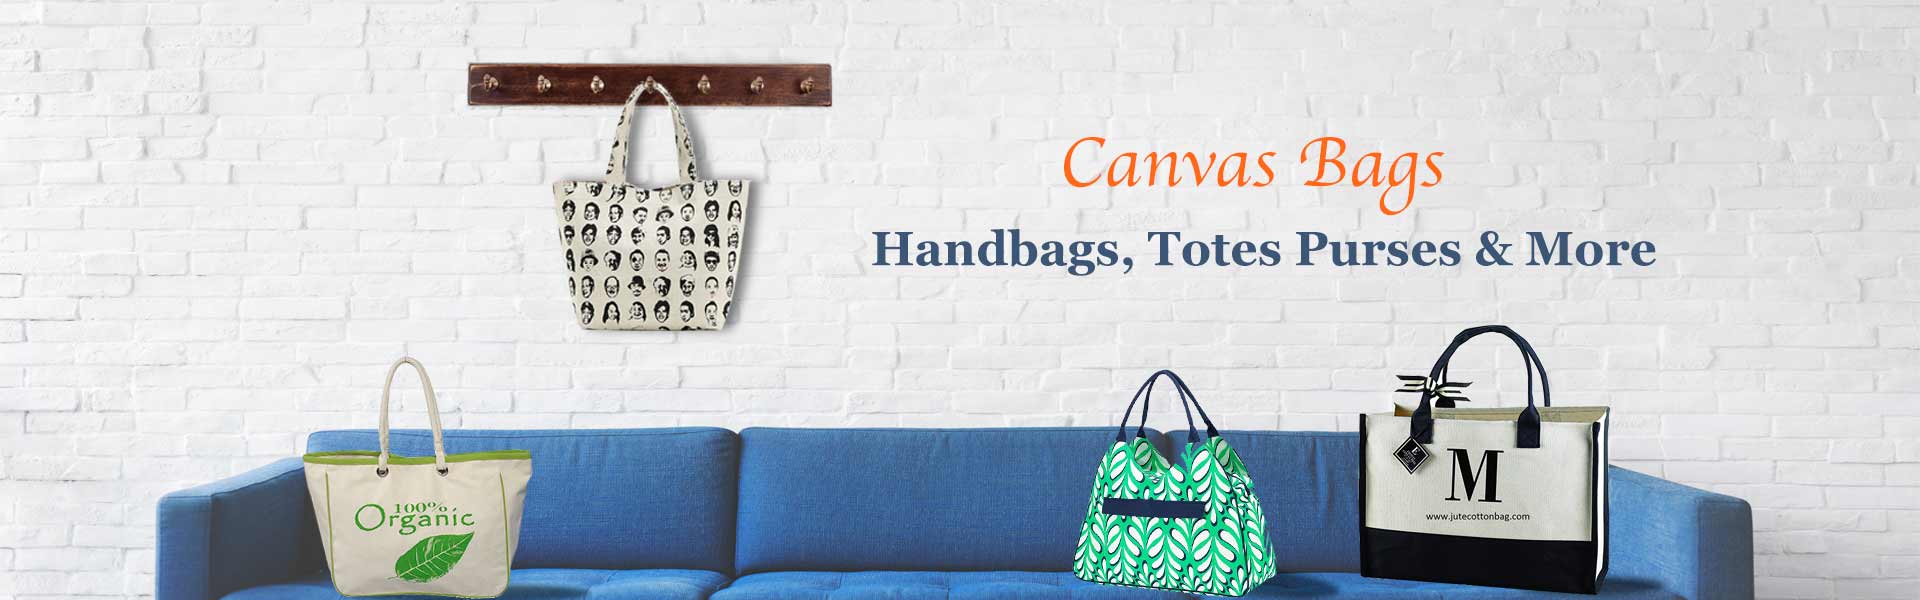 Wholesale Canvas Bags Supplier in Germany